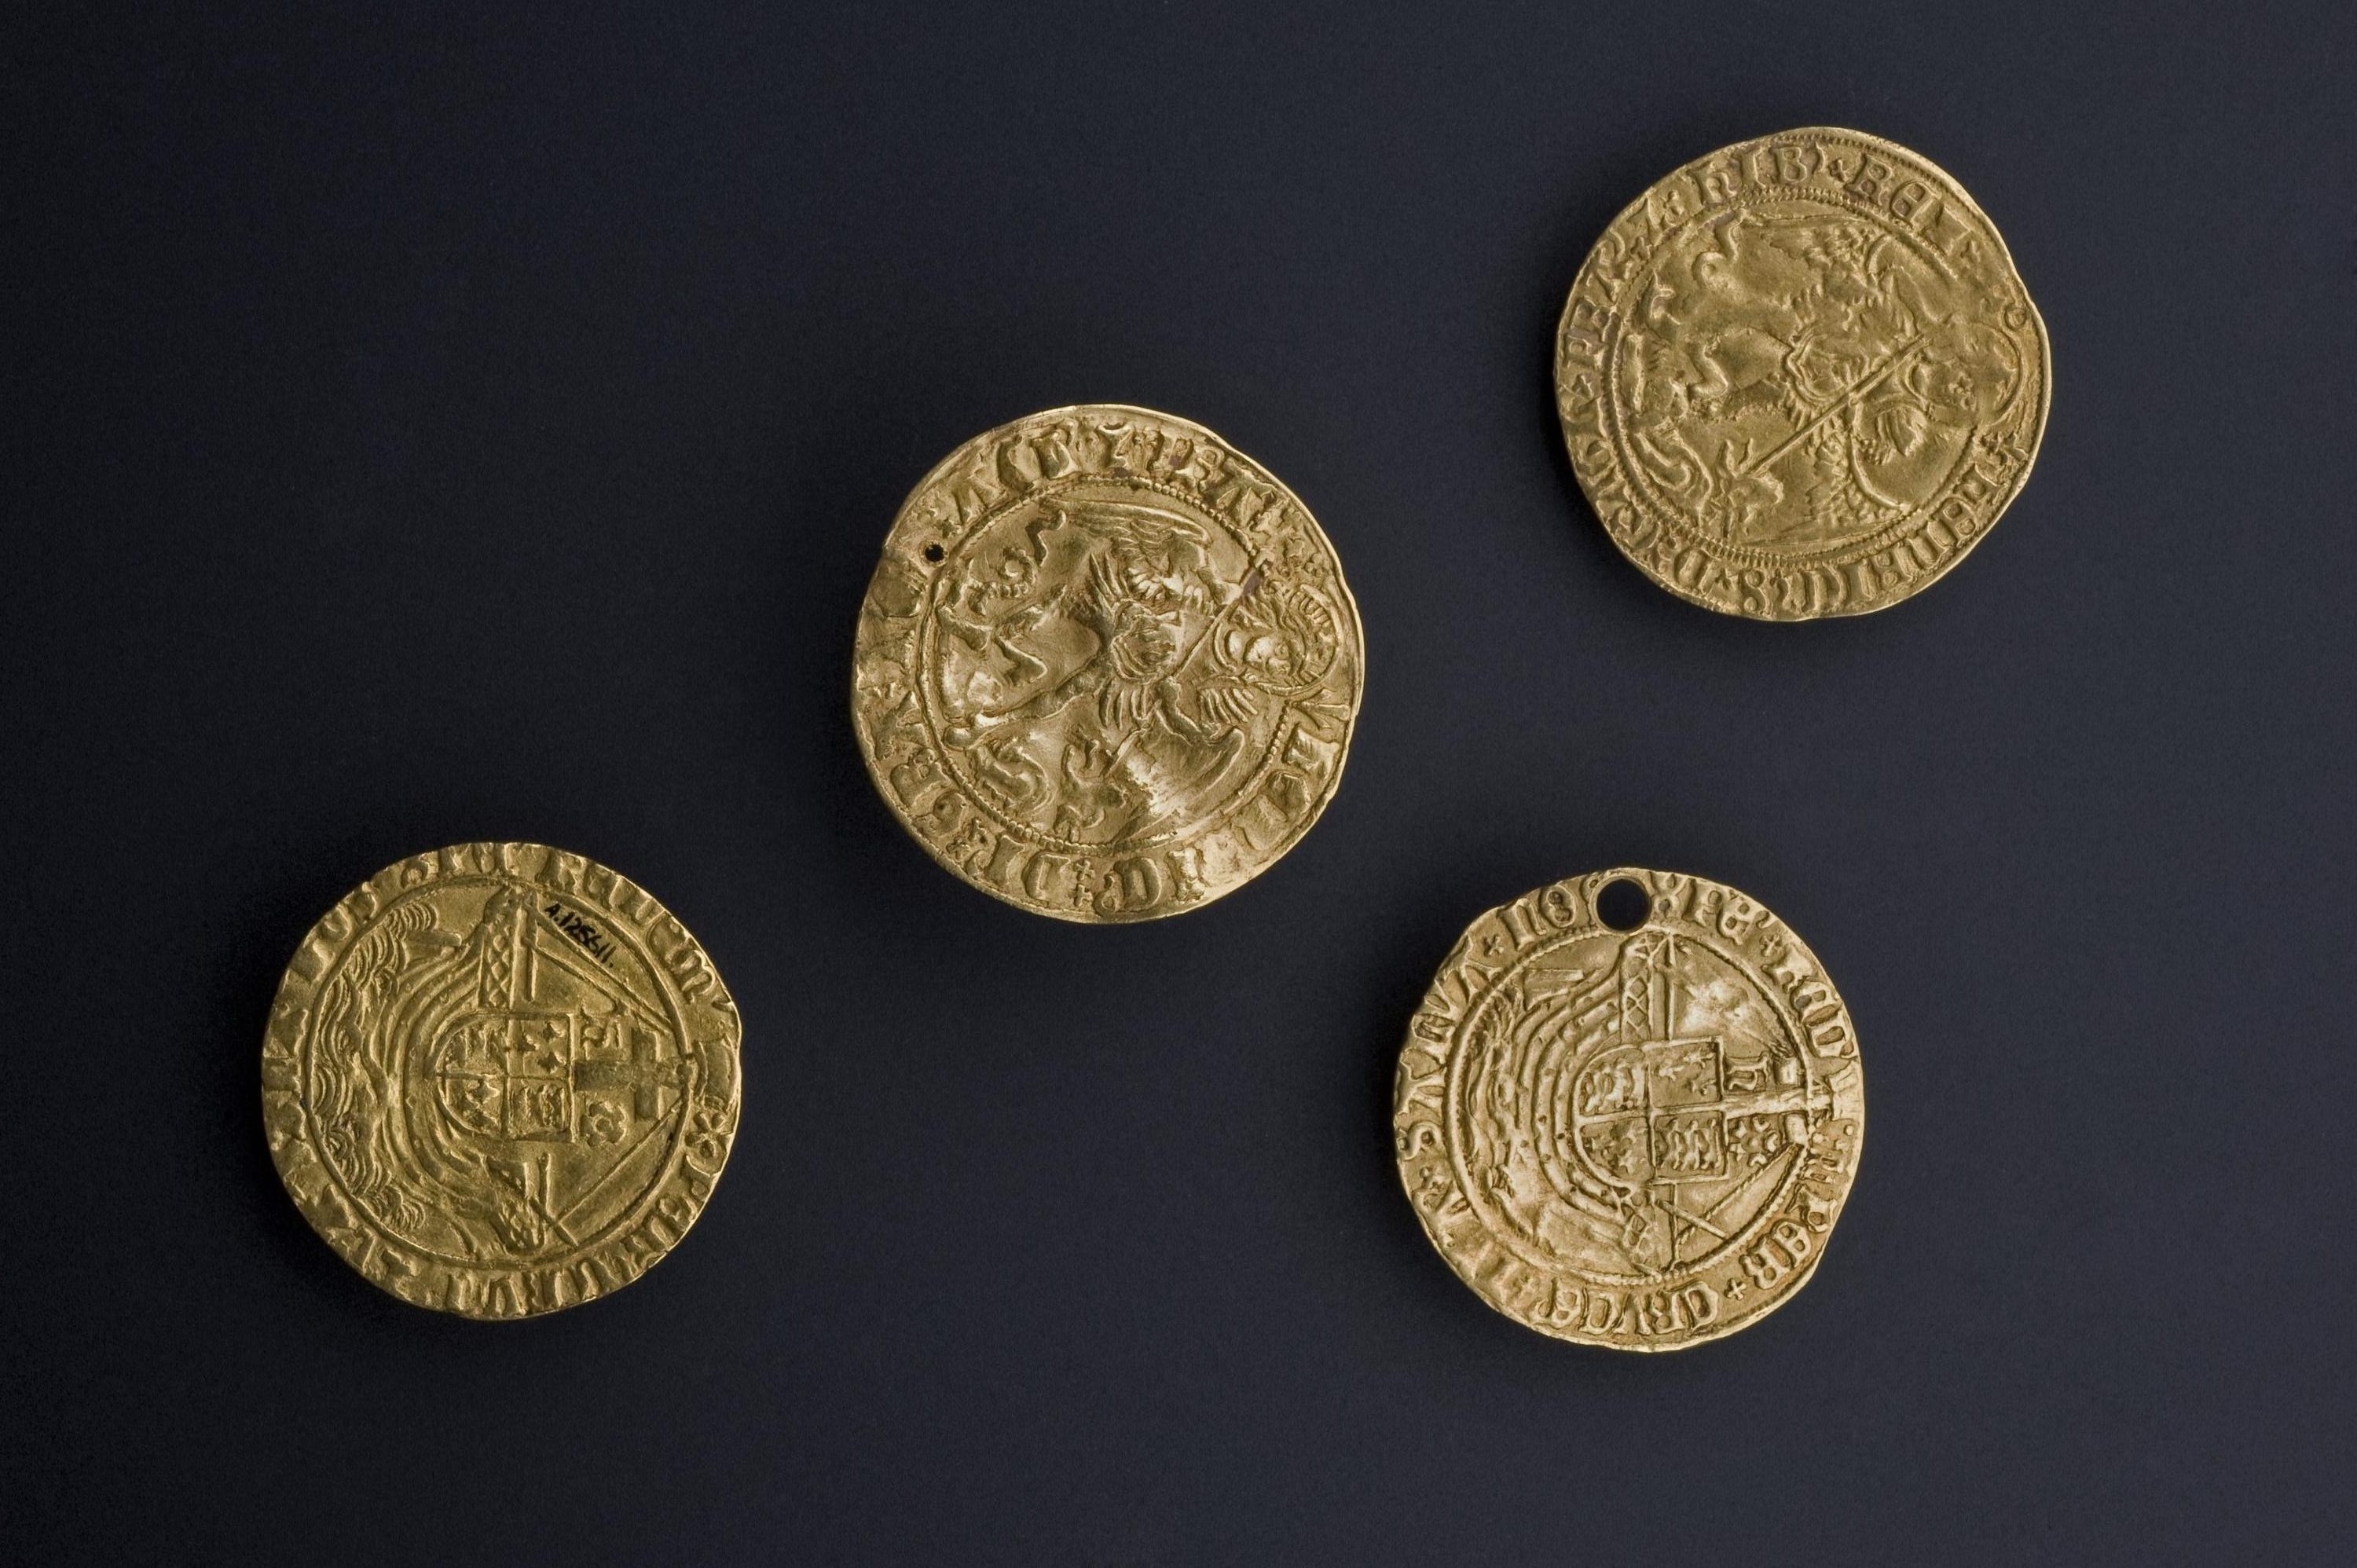 Four Gold Angel coins. Touchpieces in the ceremony of healing by touch. 